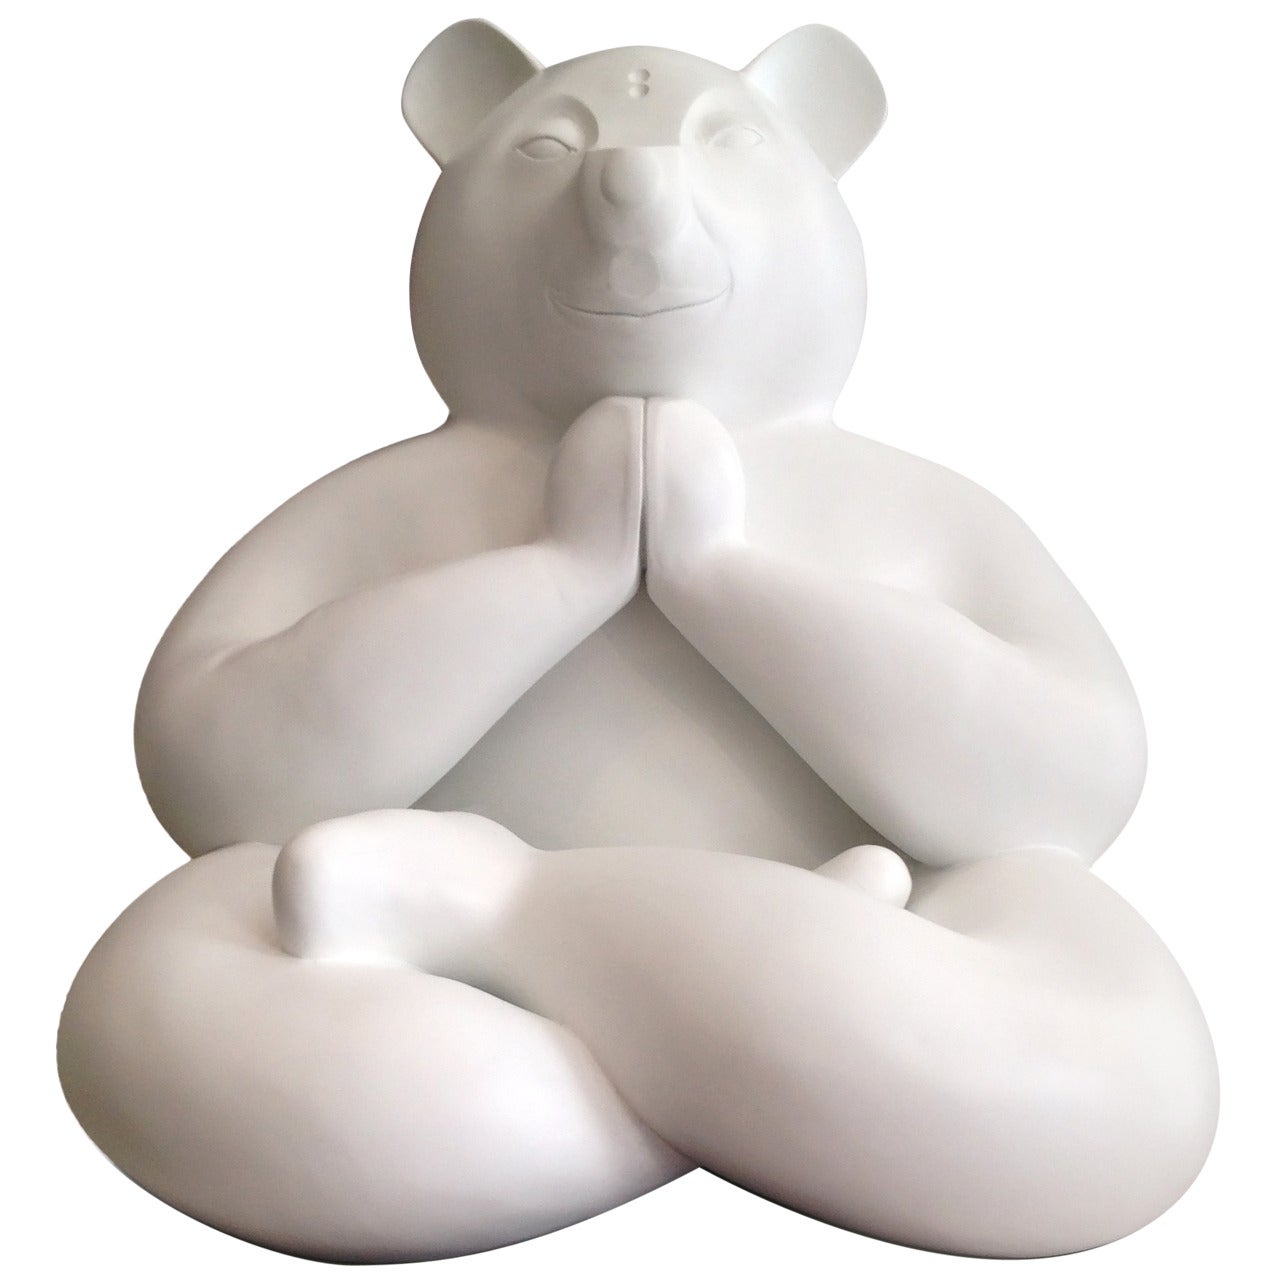 "Grand Bouddhours" Statue of a White Bear Meditating